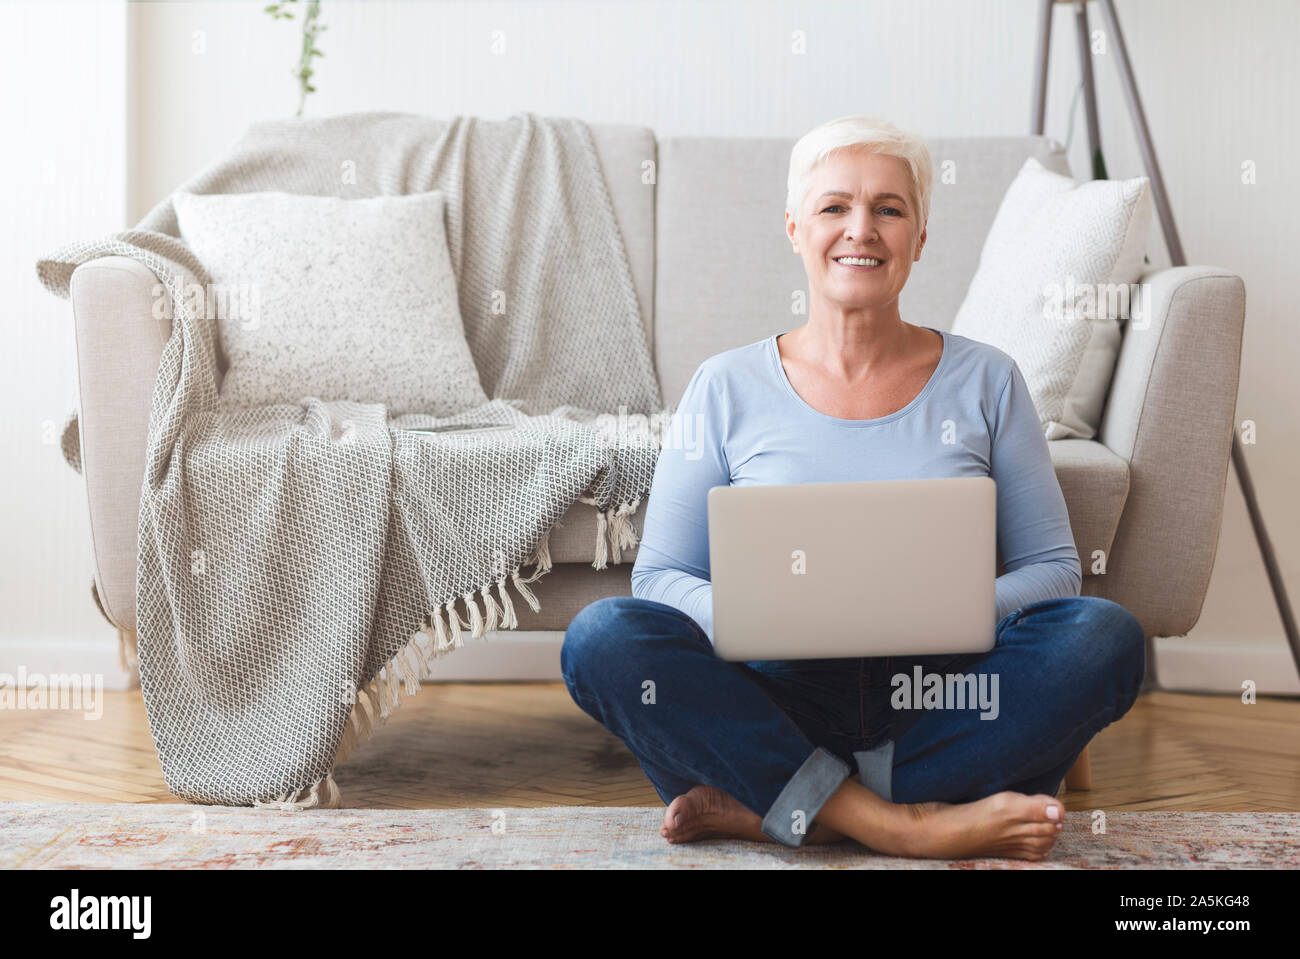 Active old woman sitting on floor and using laptop Stock Photo